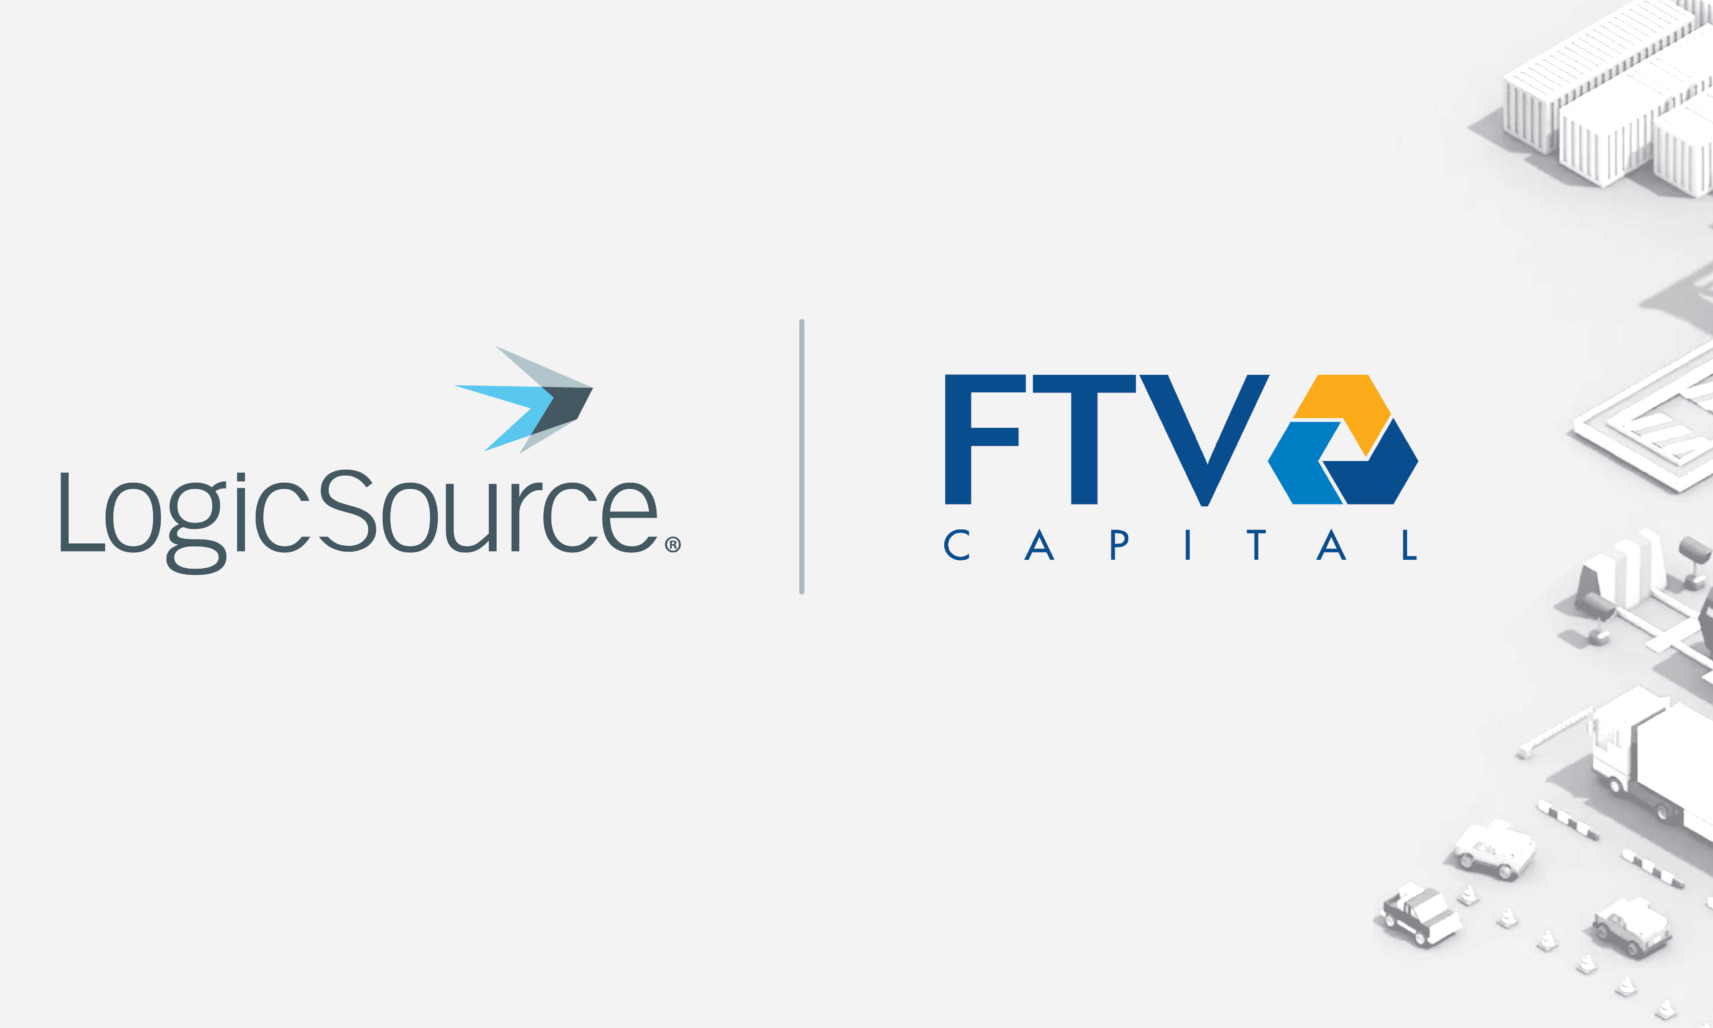 LogicSource gets $180mn growth investment from FTV Capital